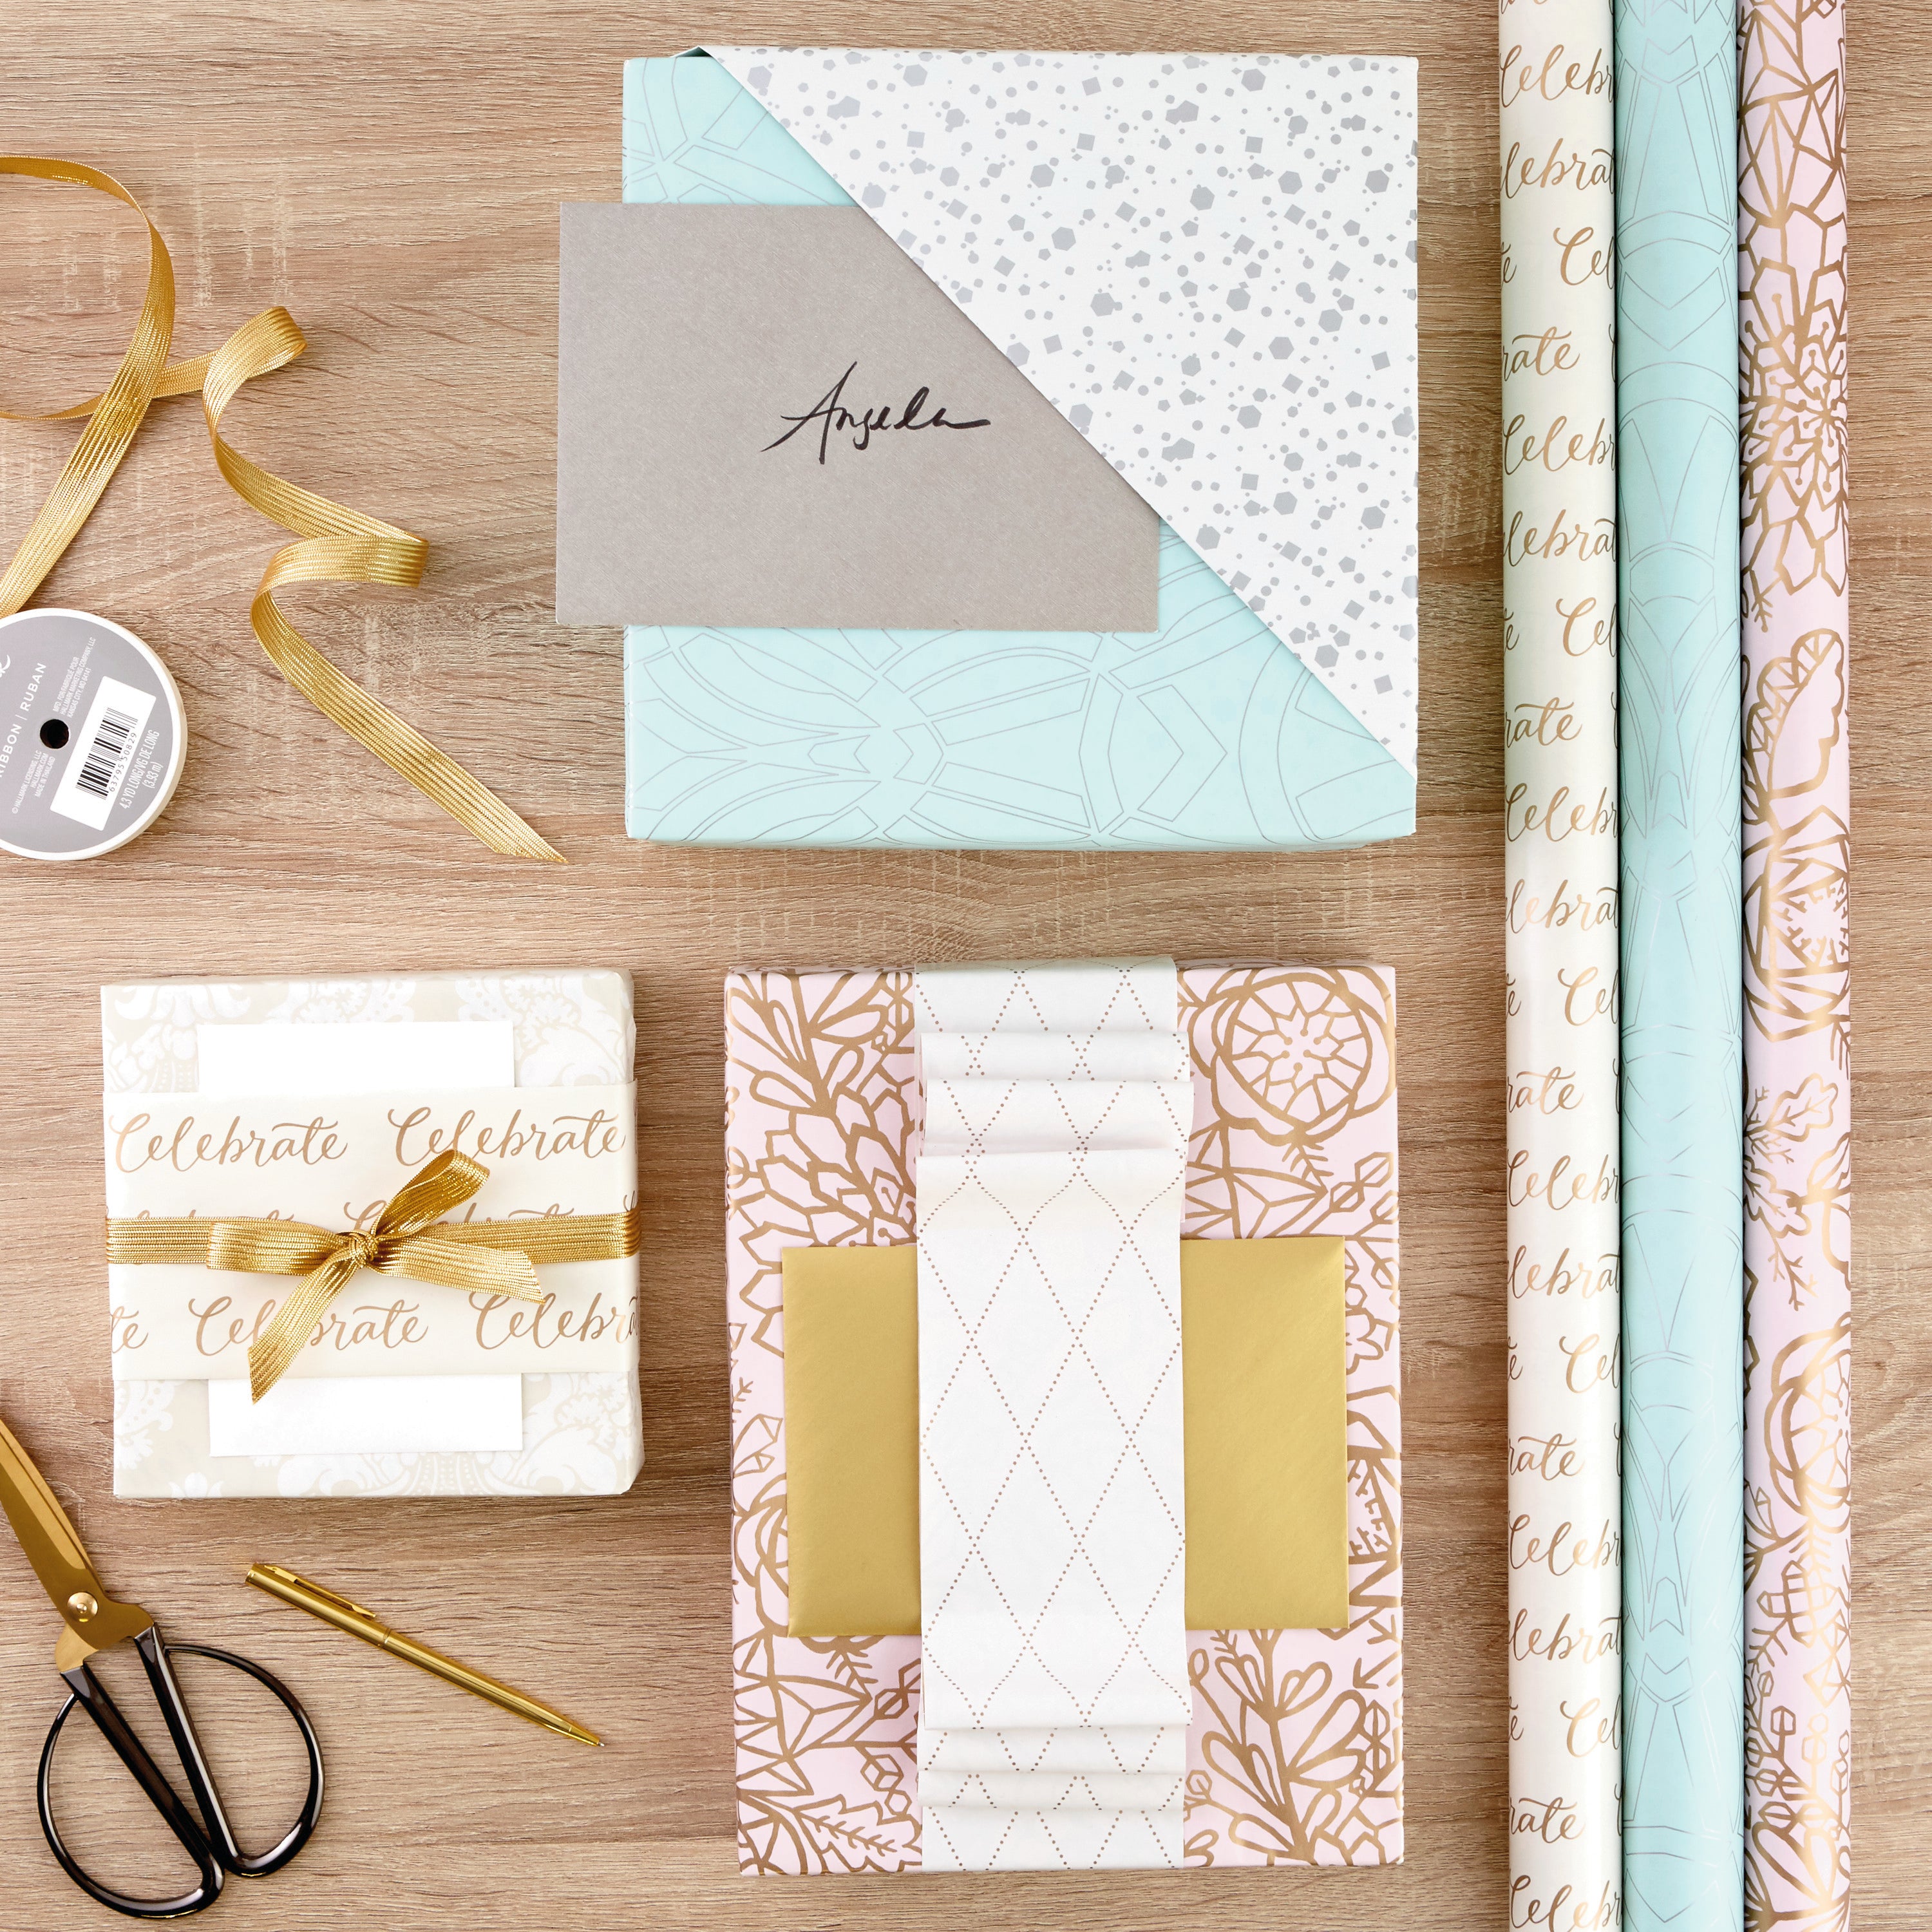 Hallmark All Occasion Reversible Wrapping Paper Bundle - Pastel & Metallic Celebrate (3-Pack: 75 sq. ft. ttl.) for Weddings, Birthdays, Baby Showers, Bridal Showers, Valentine's Day and More